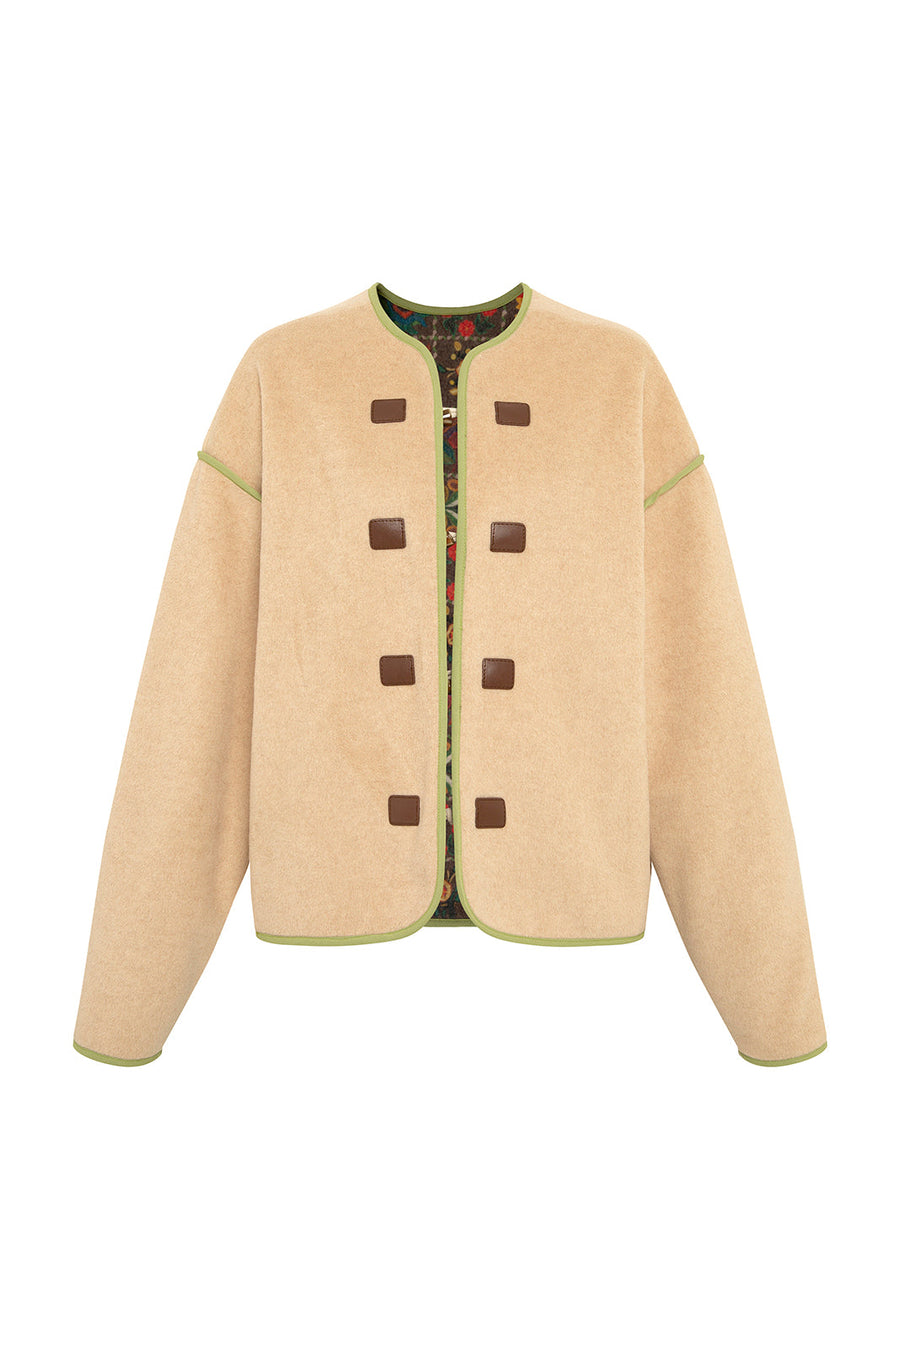 INA - Double-faced jacket with contrast piping